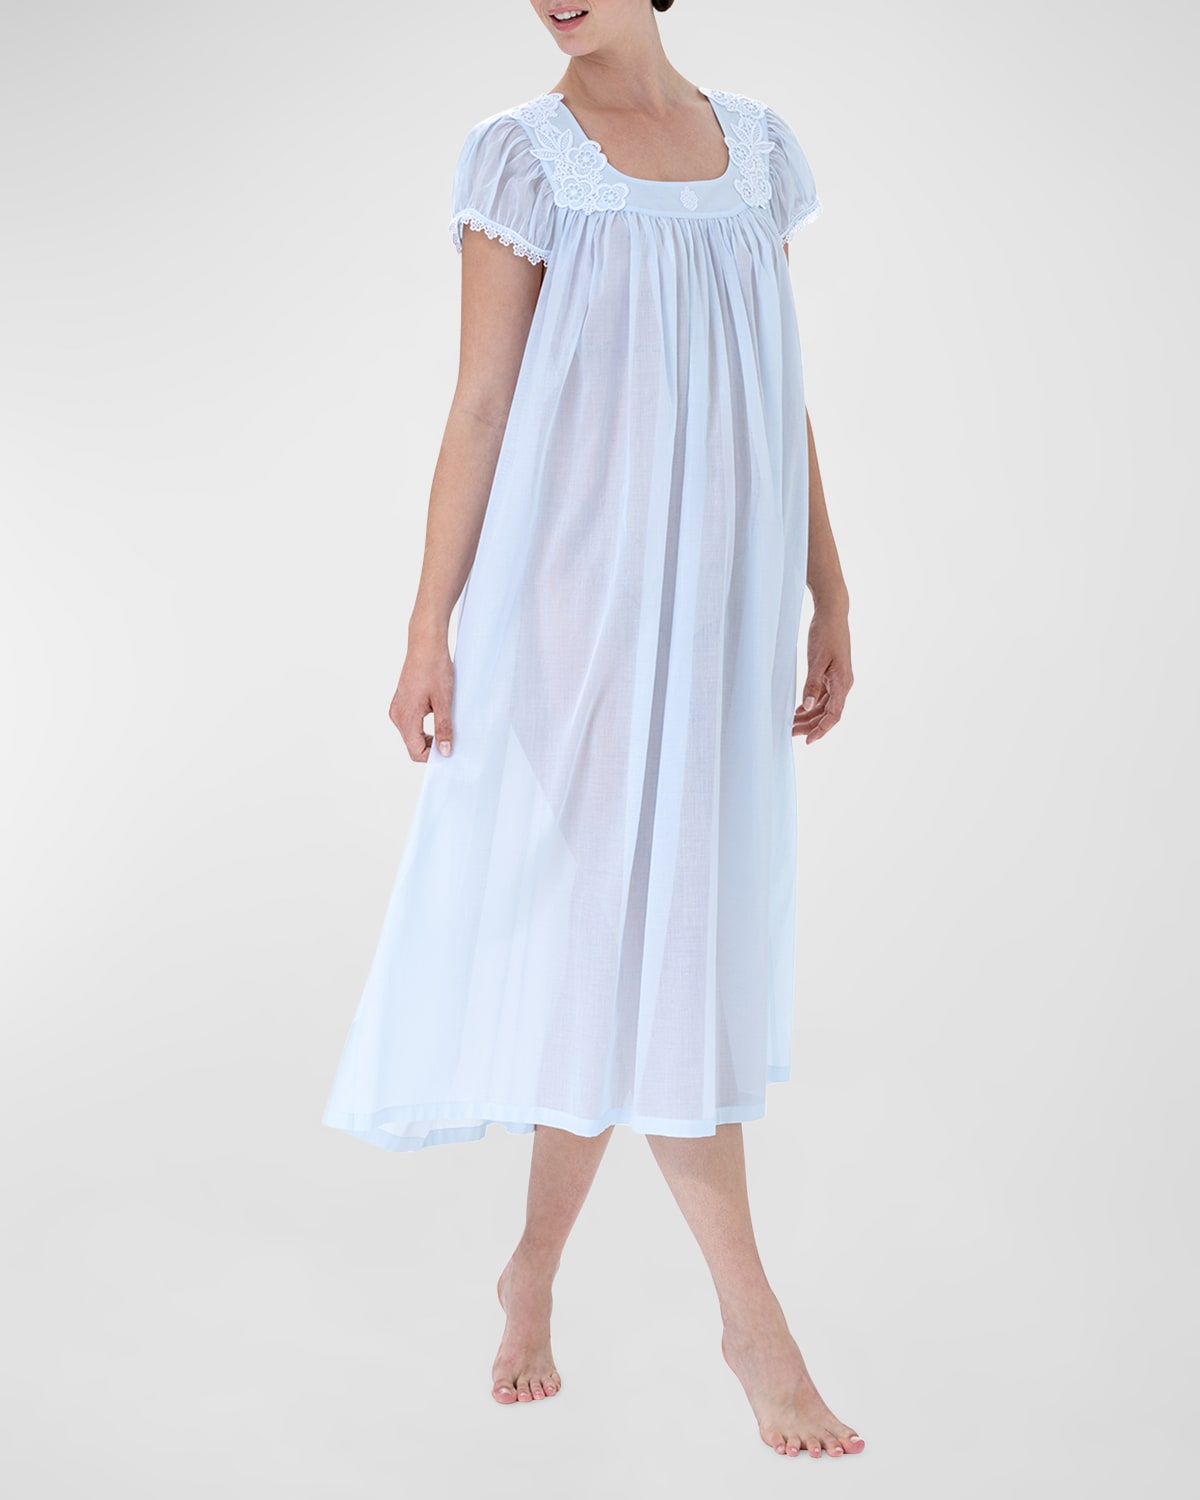 Ronya-2 Ruched Lace-Trim Cotton Nightgown